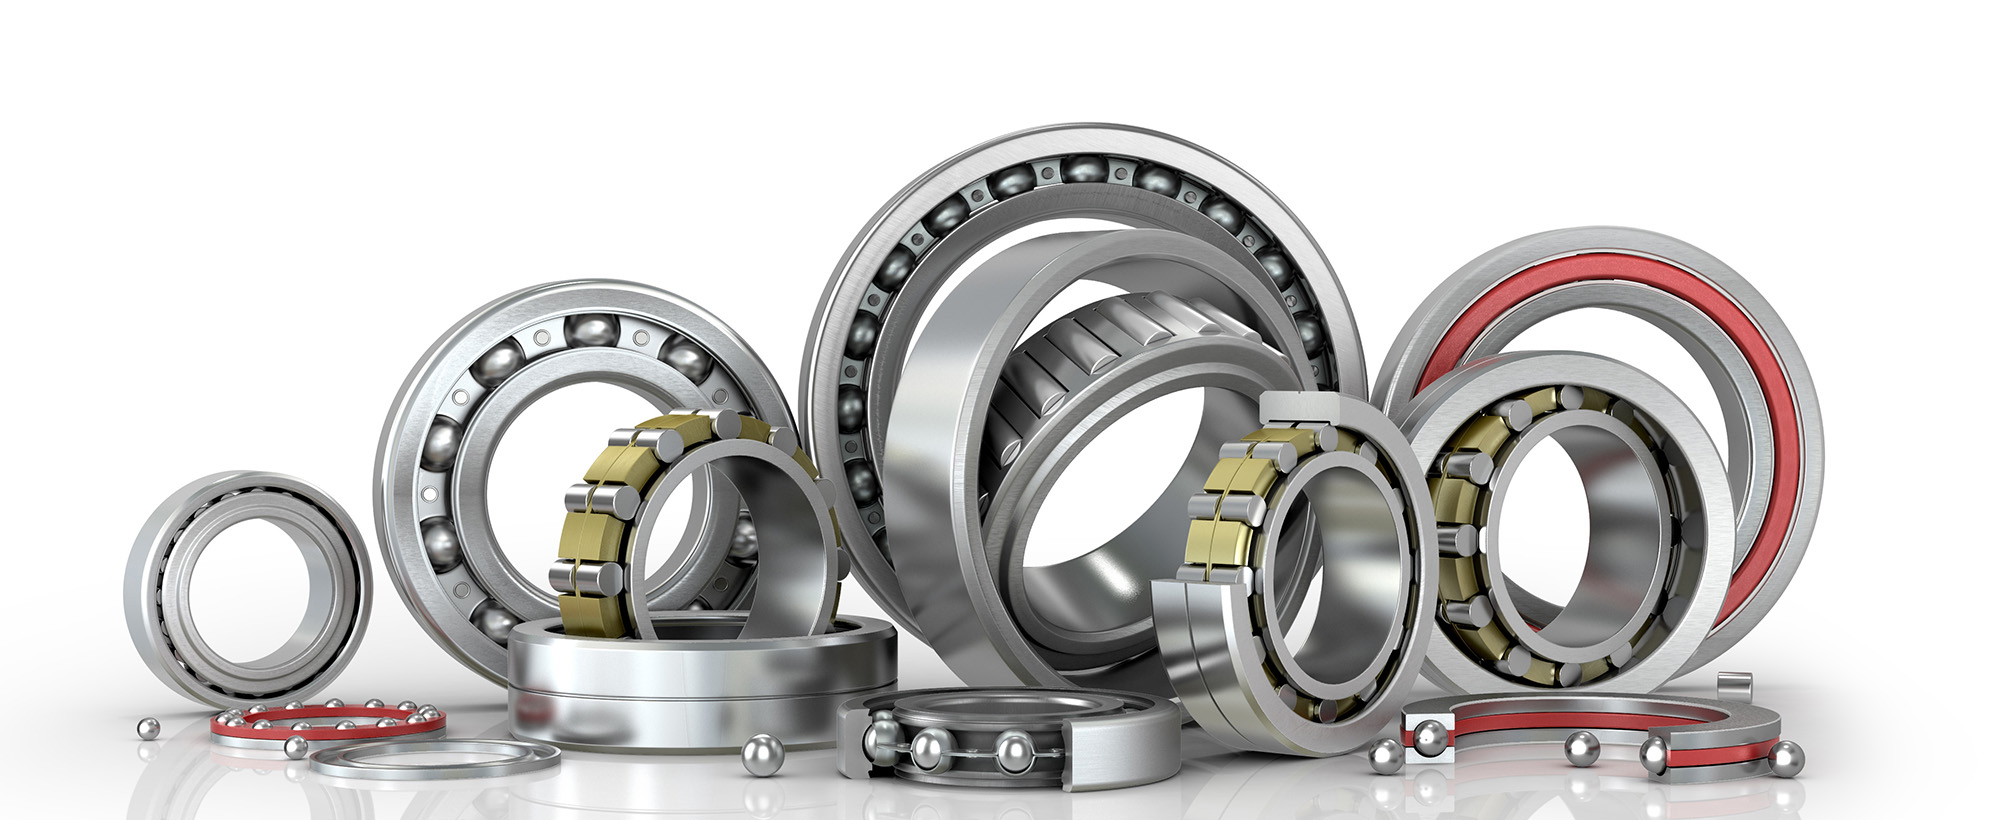 If you are planning an off-roading trip, you need the vehicle’s wheel assembly bearing system to be good and strong.